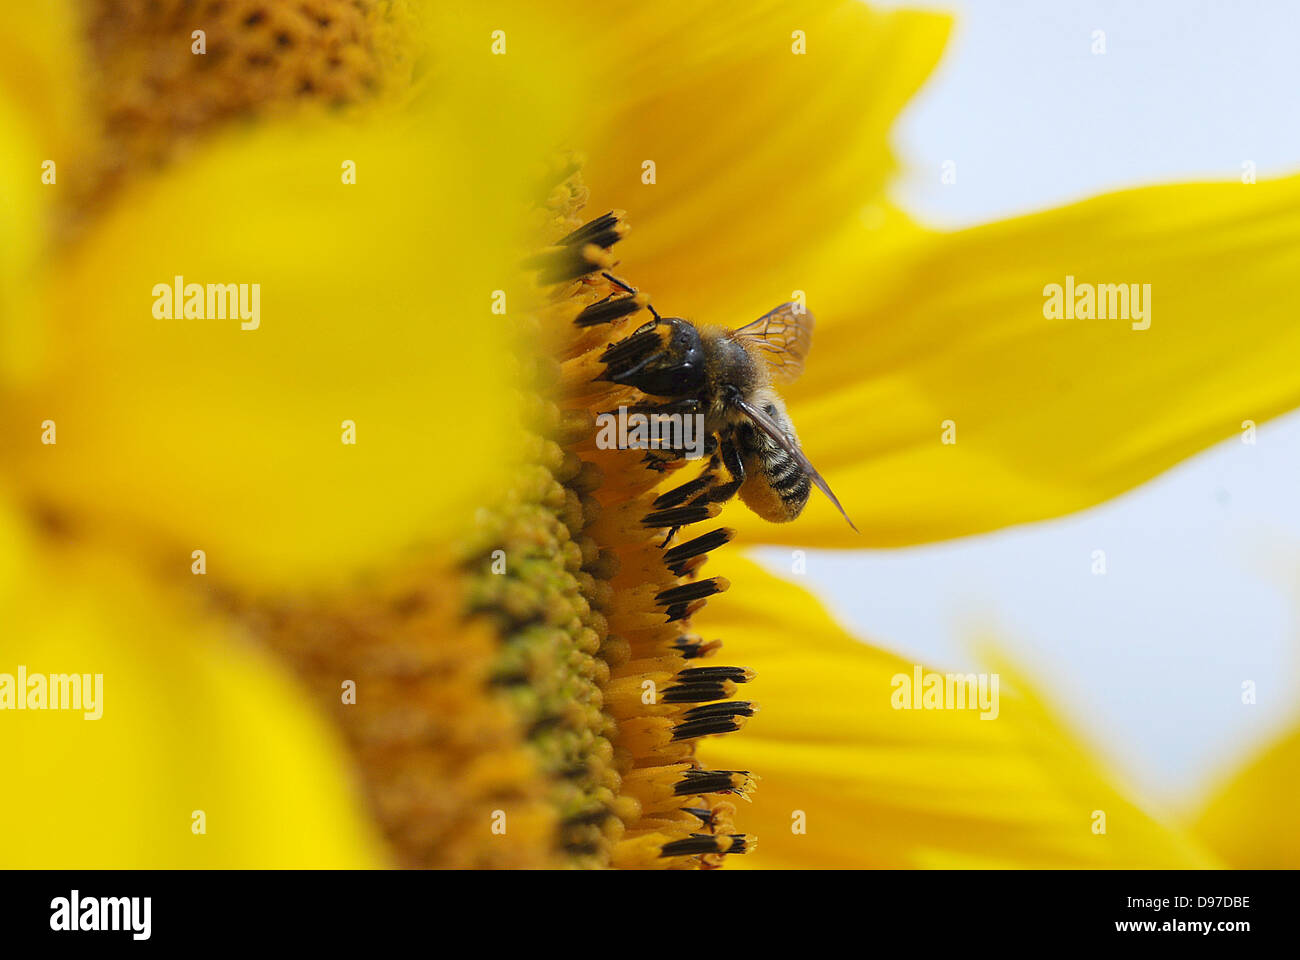 Leaf Cutter Bee gathering pollen from sunflower Stock Photo